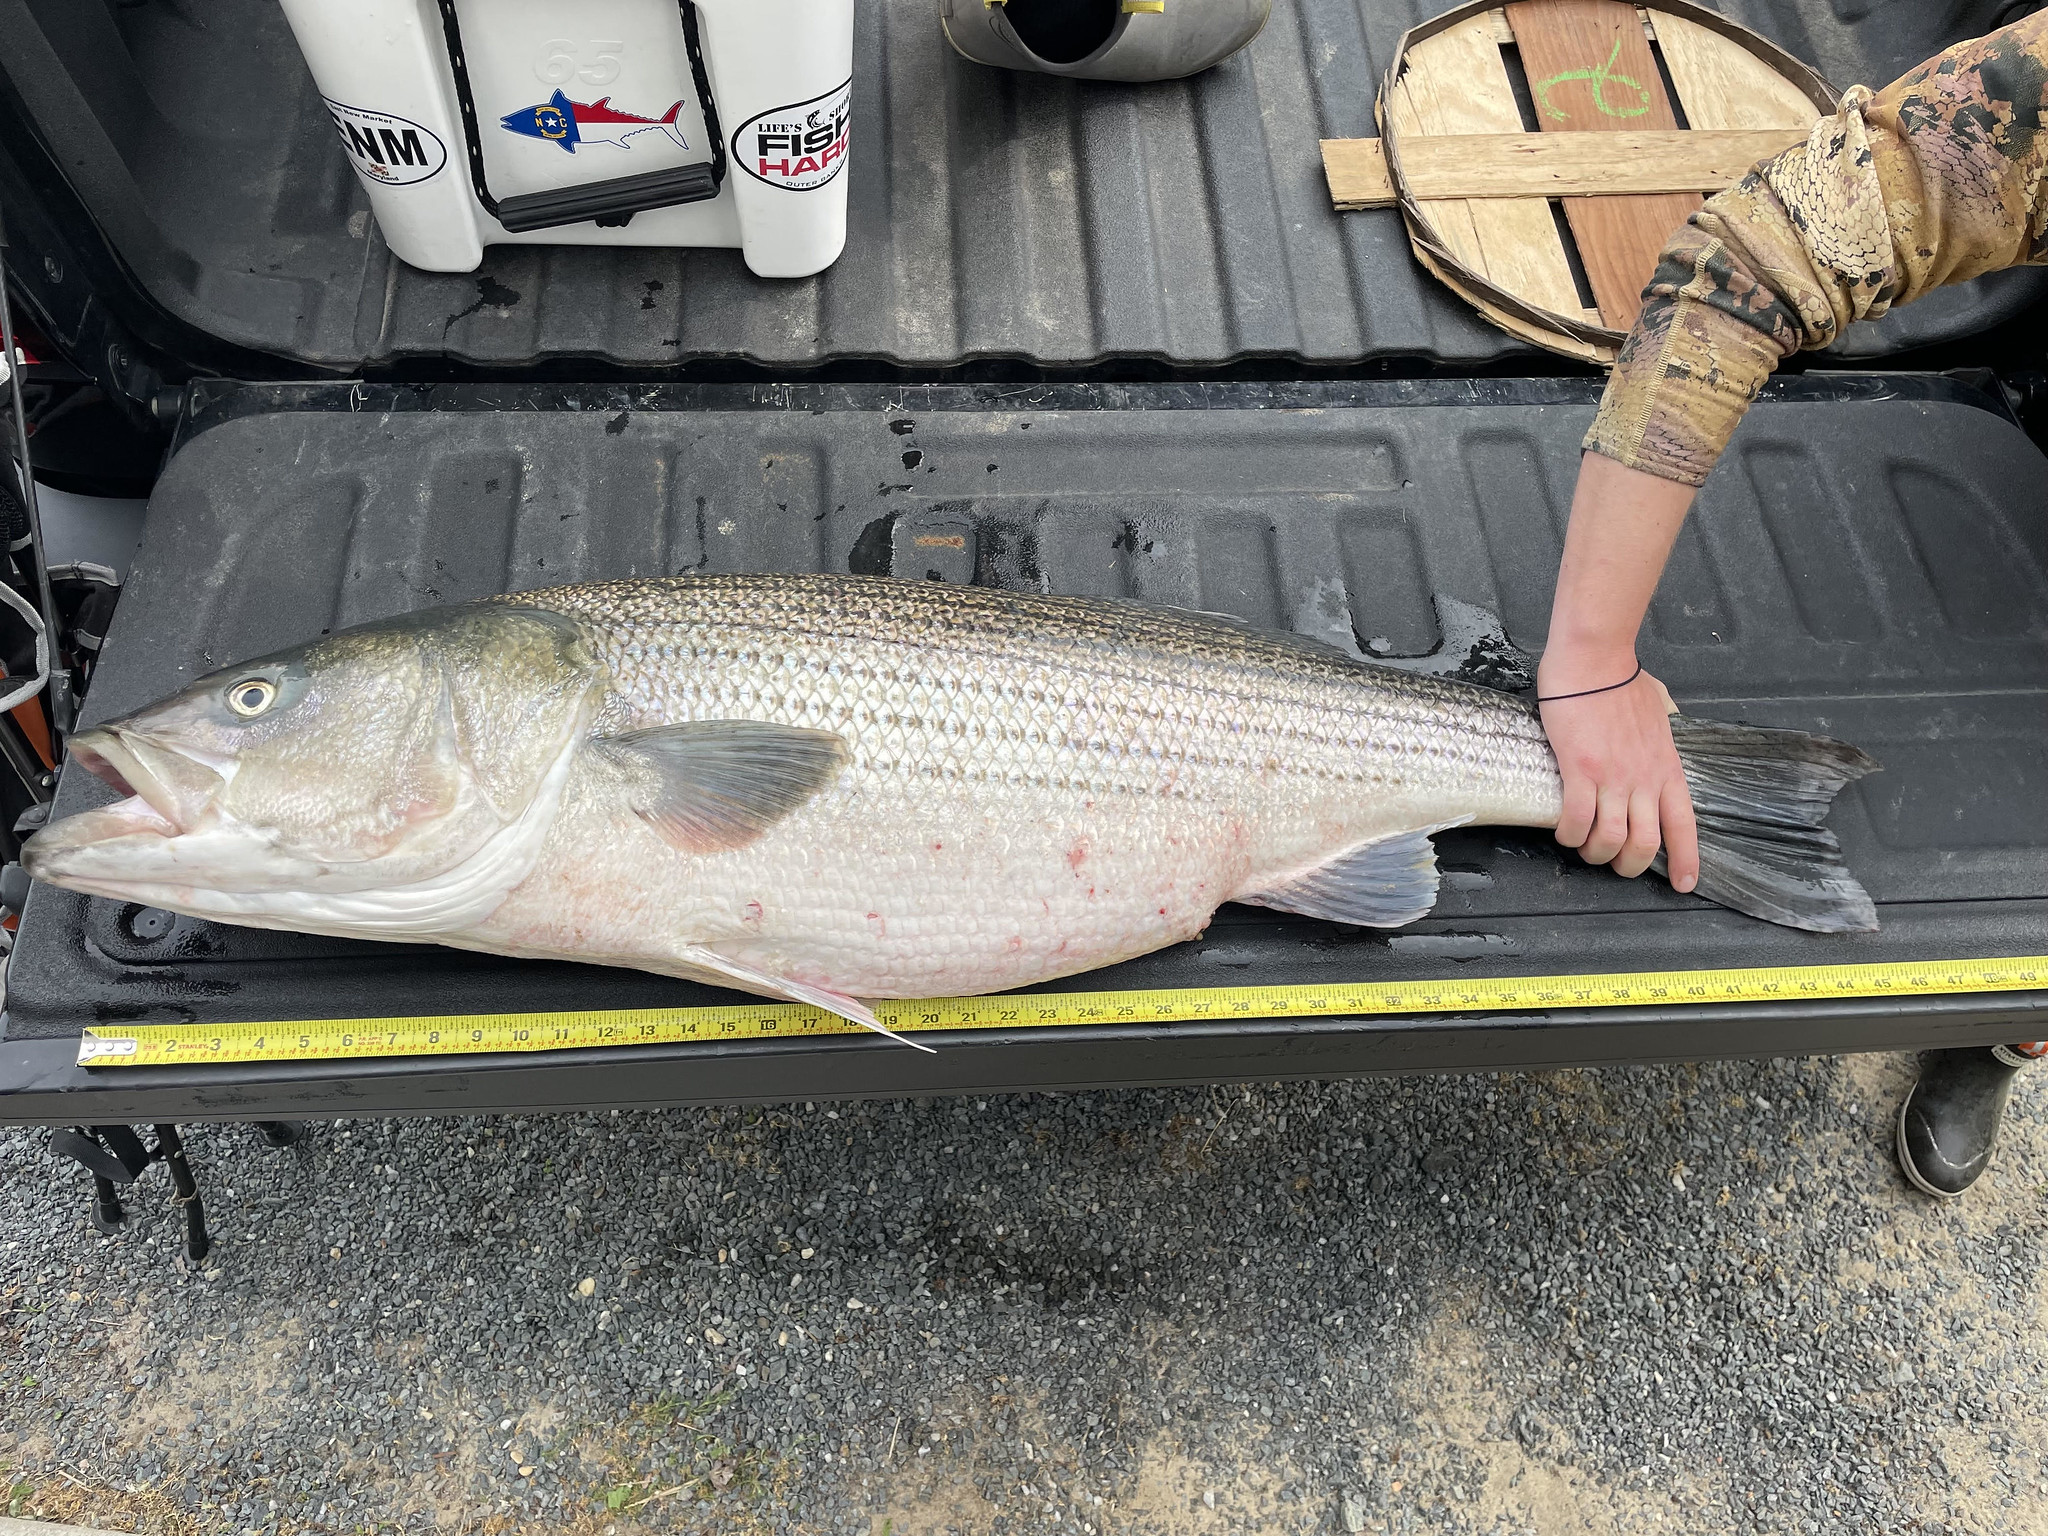 Angler Andrew Phemister measures a 46" Striped Bass he caught in the Chesapeake Bay in May 2022. Photo: Maryland Fisheries Service DNR/Flickr